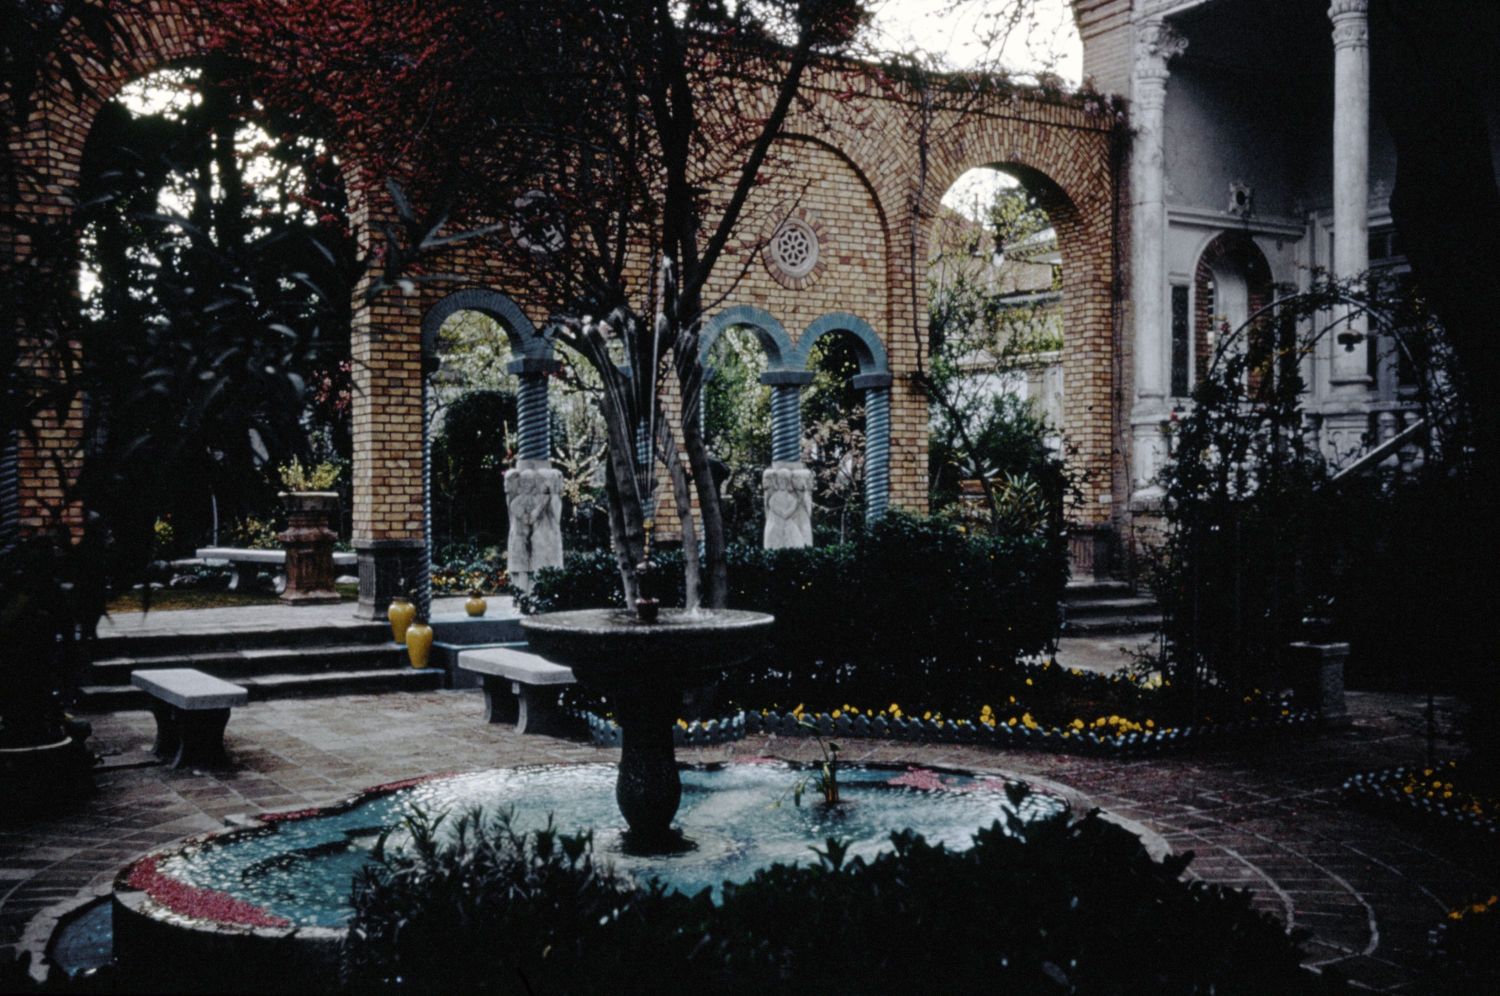 View of fountain.